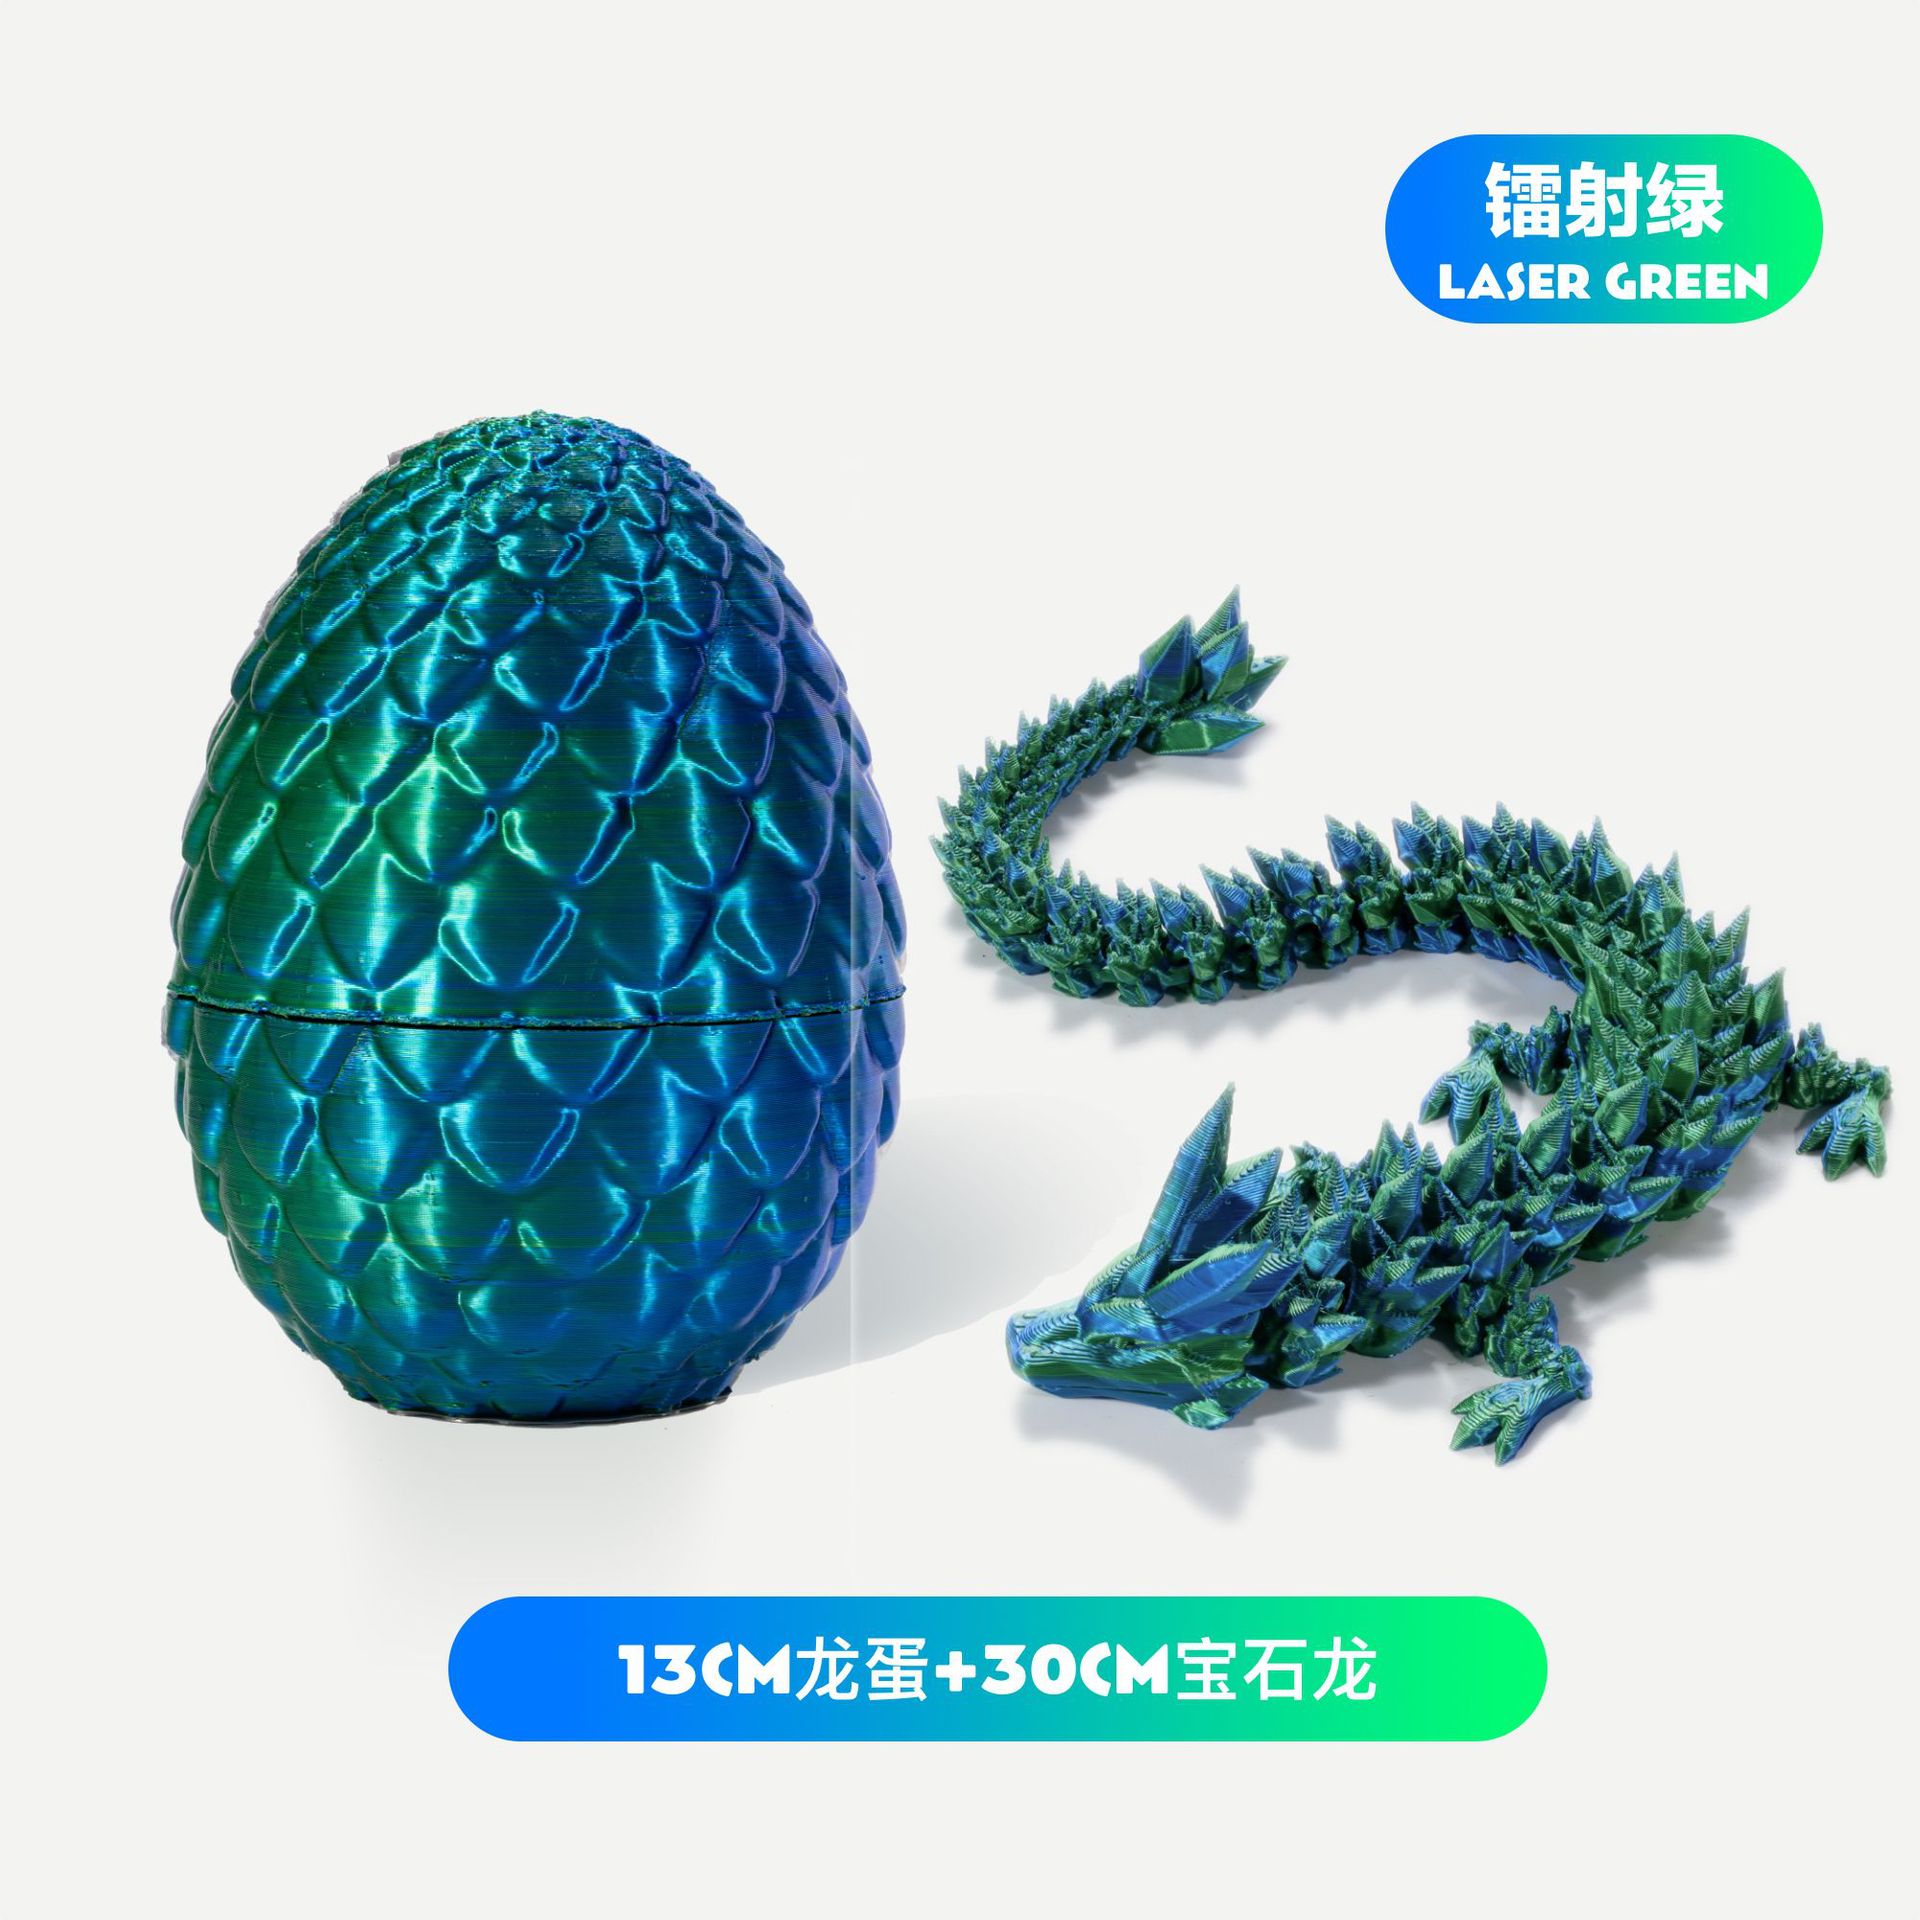 3D Printing Dragon Egg Dragon Suit Toy Gem Dragon Decoration Hand-Made Gift Color Decorative Creative Fashion Play